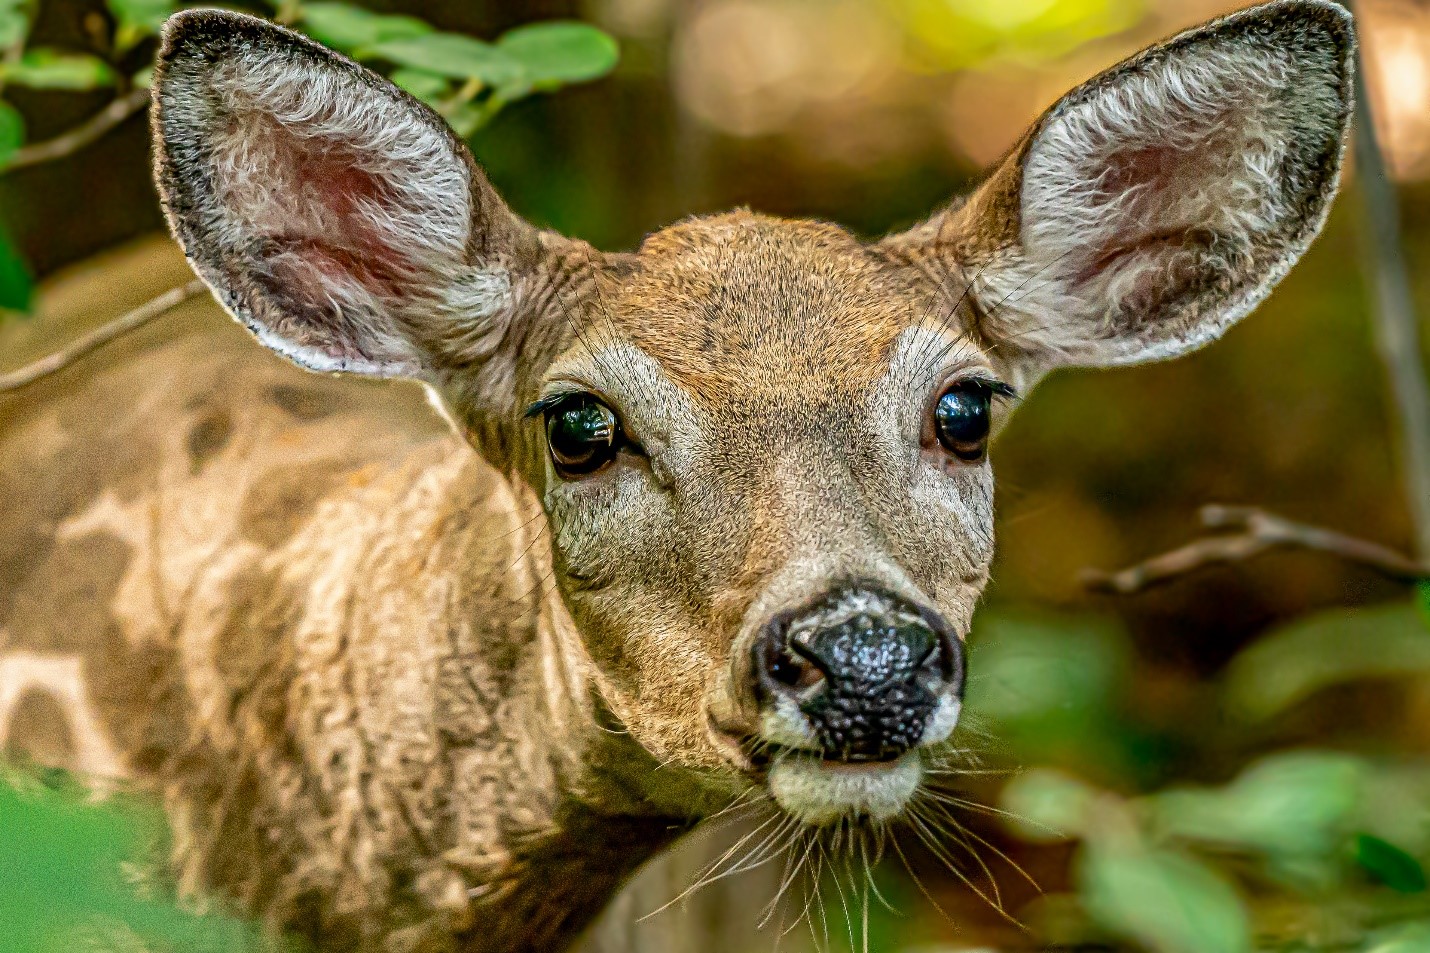 An intimate moment with a white-tailed deer is captured by Delaware photographer Kimberly Barksdale.